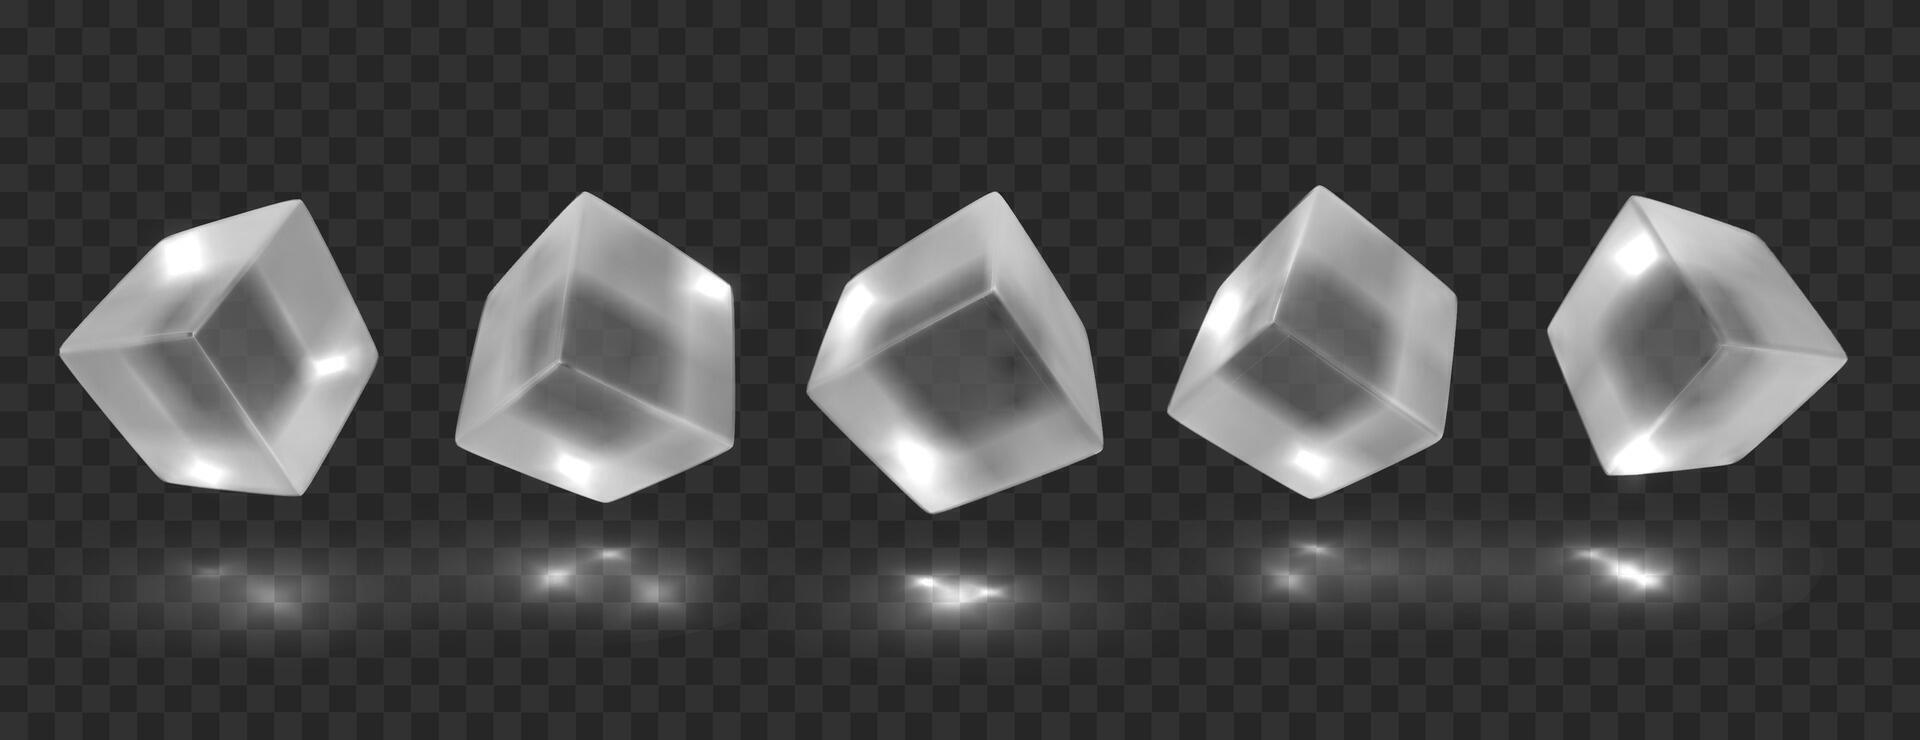 Transparent cubes in different angles with reflection. Isolated glossy geometric objects. Realistic 3d vector illustration